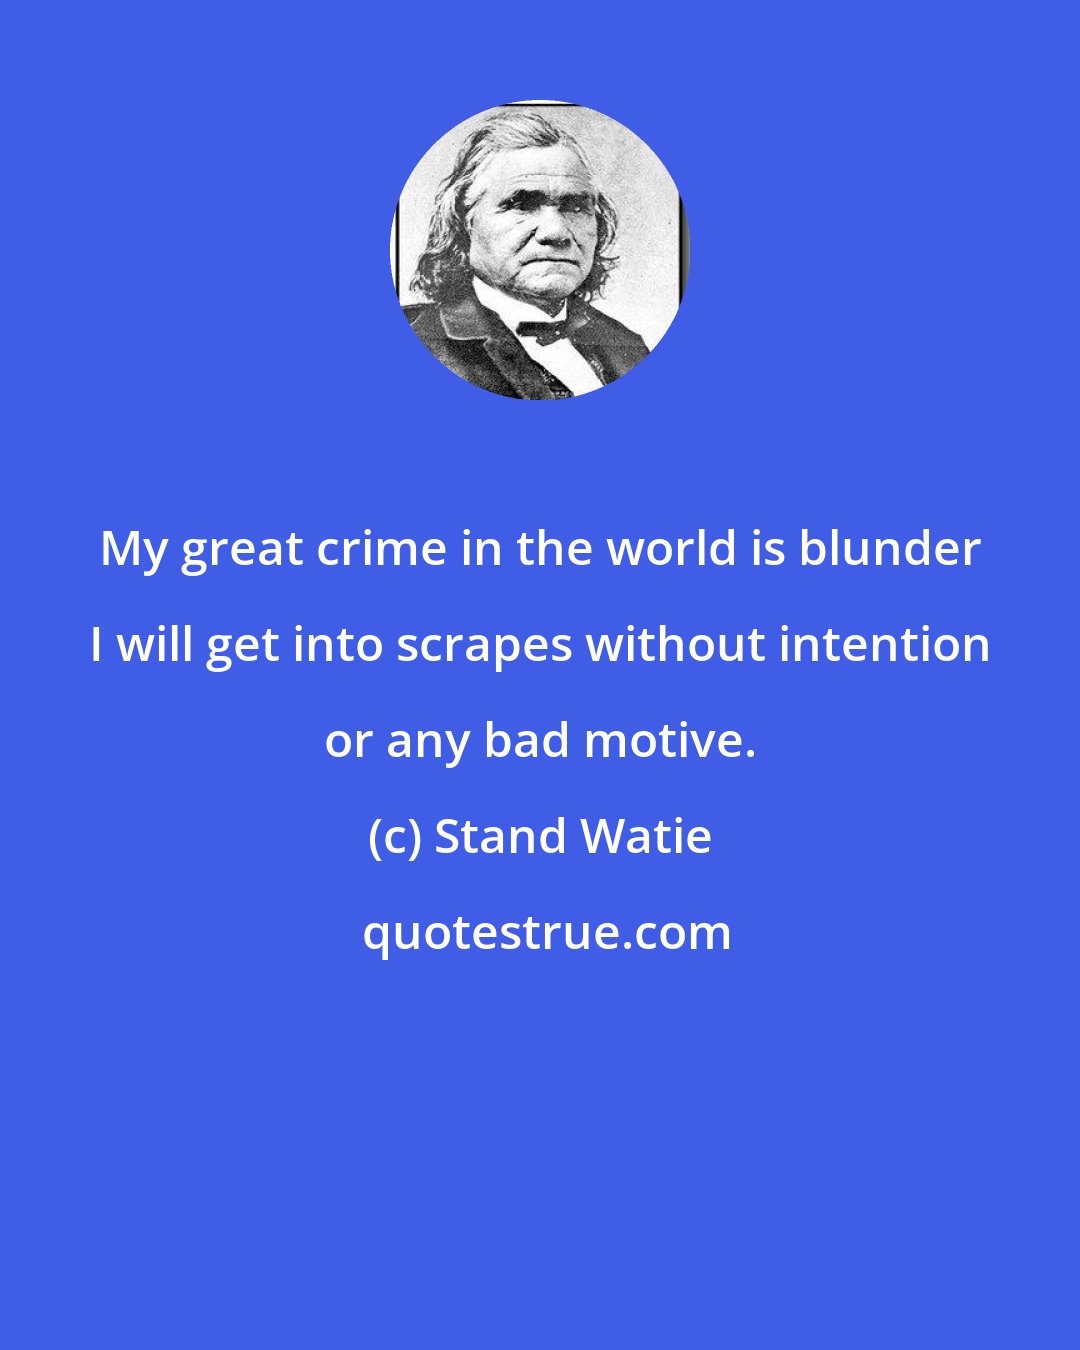 Stand Watie: My great crime in the world is blunder I will get into scrapes without intention or any bad motive.